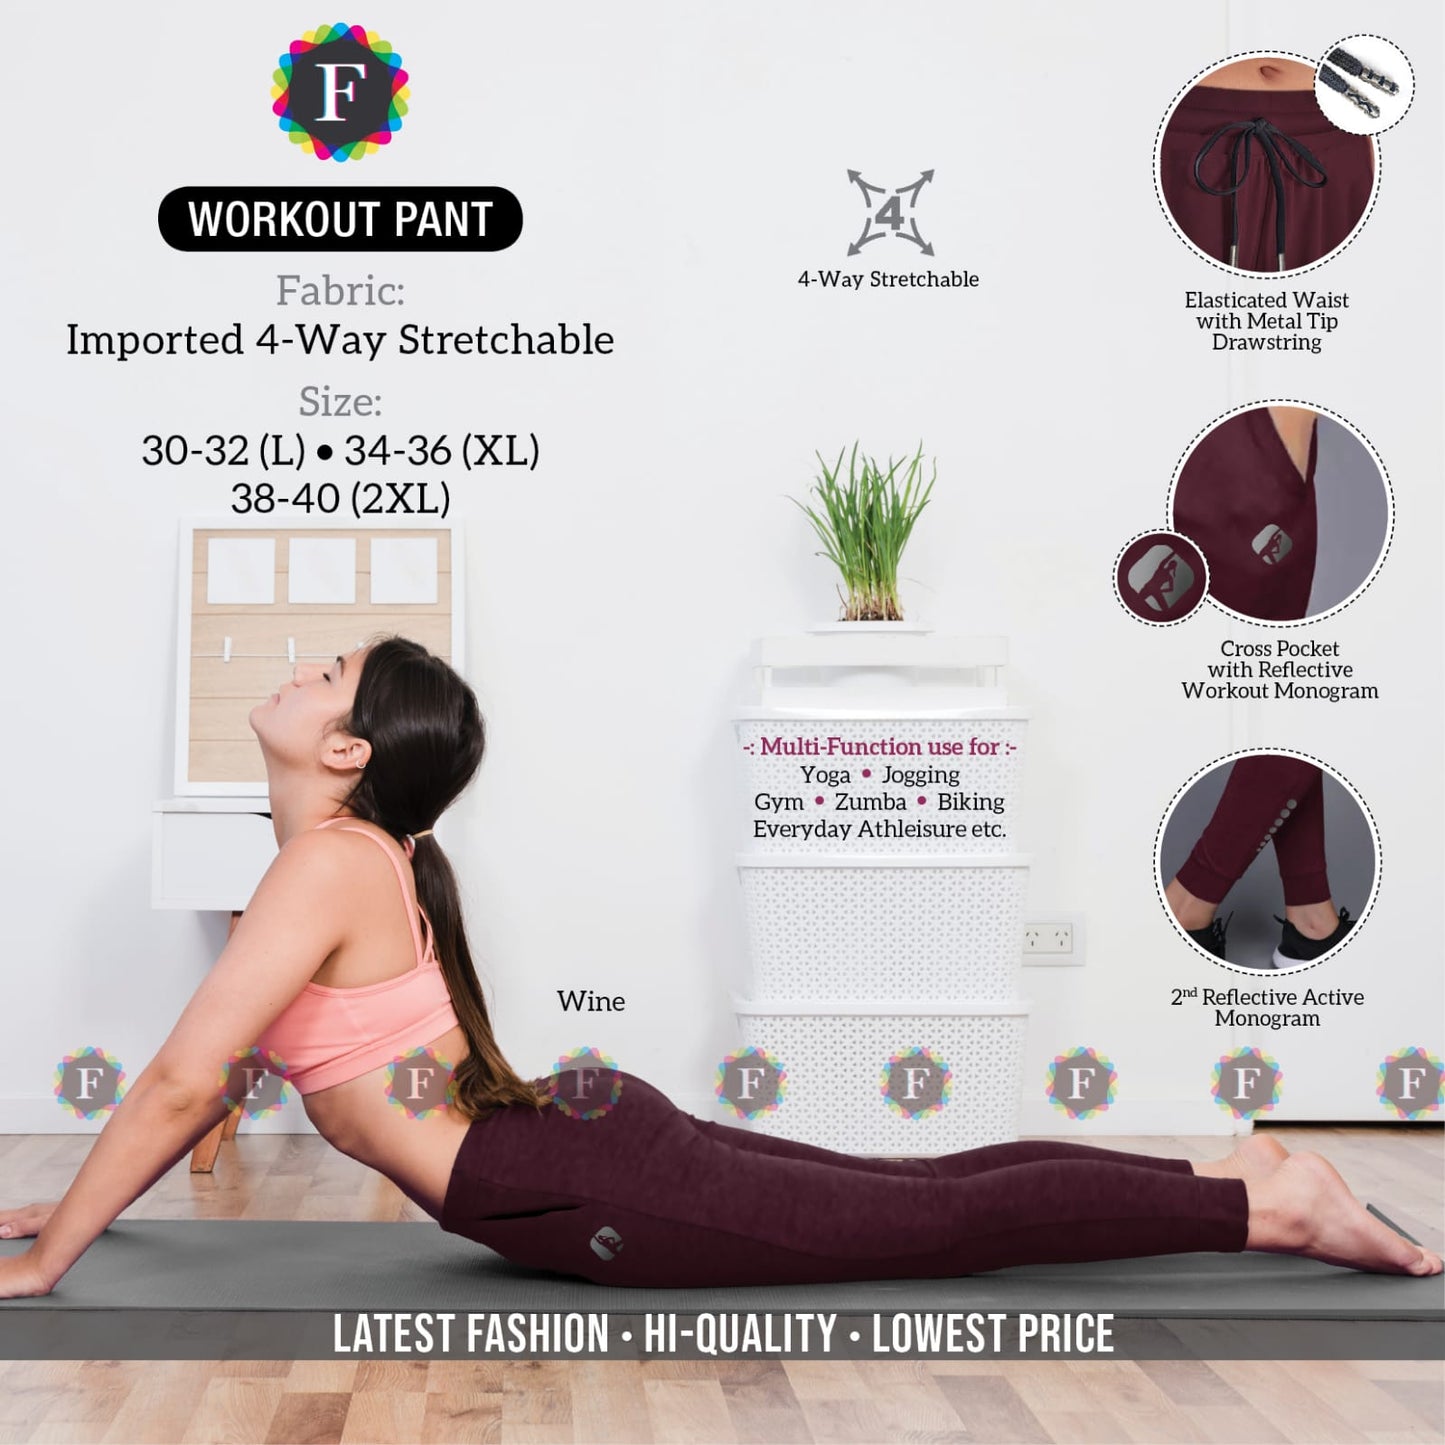 WORKOUT 4-Way Stretchable PANT - SWASTIK CREATIONS The Trend Point SWASTIK CREATIONS The Trend Point